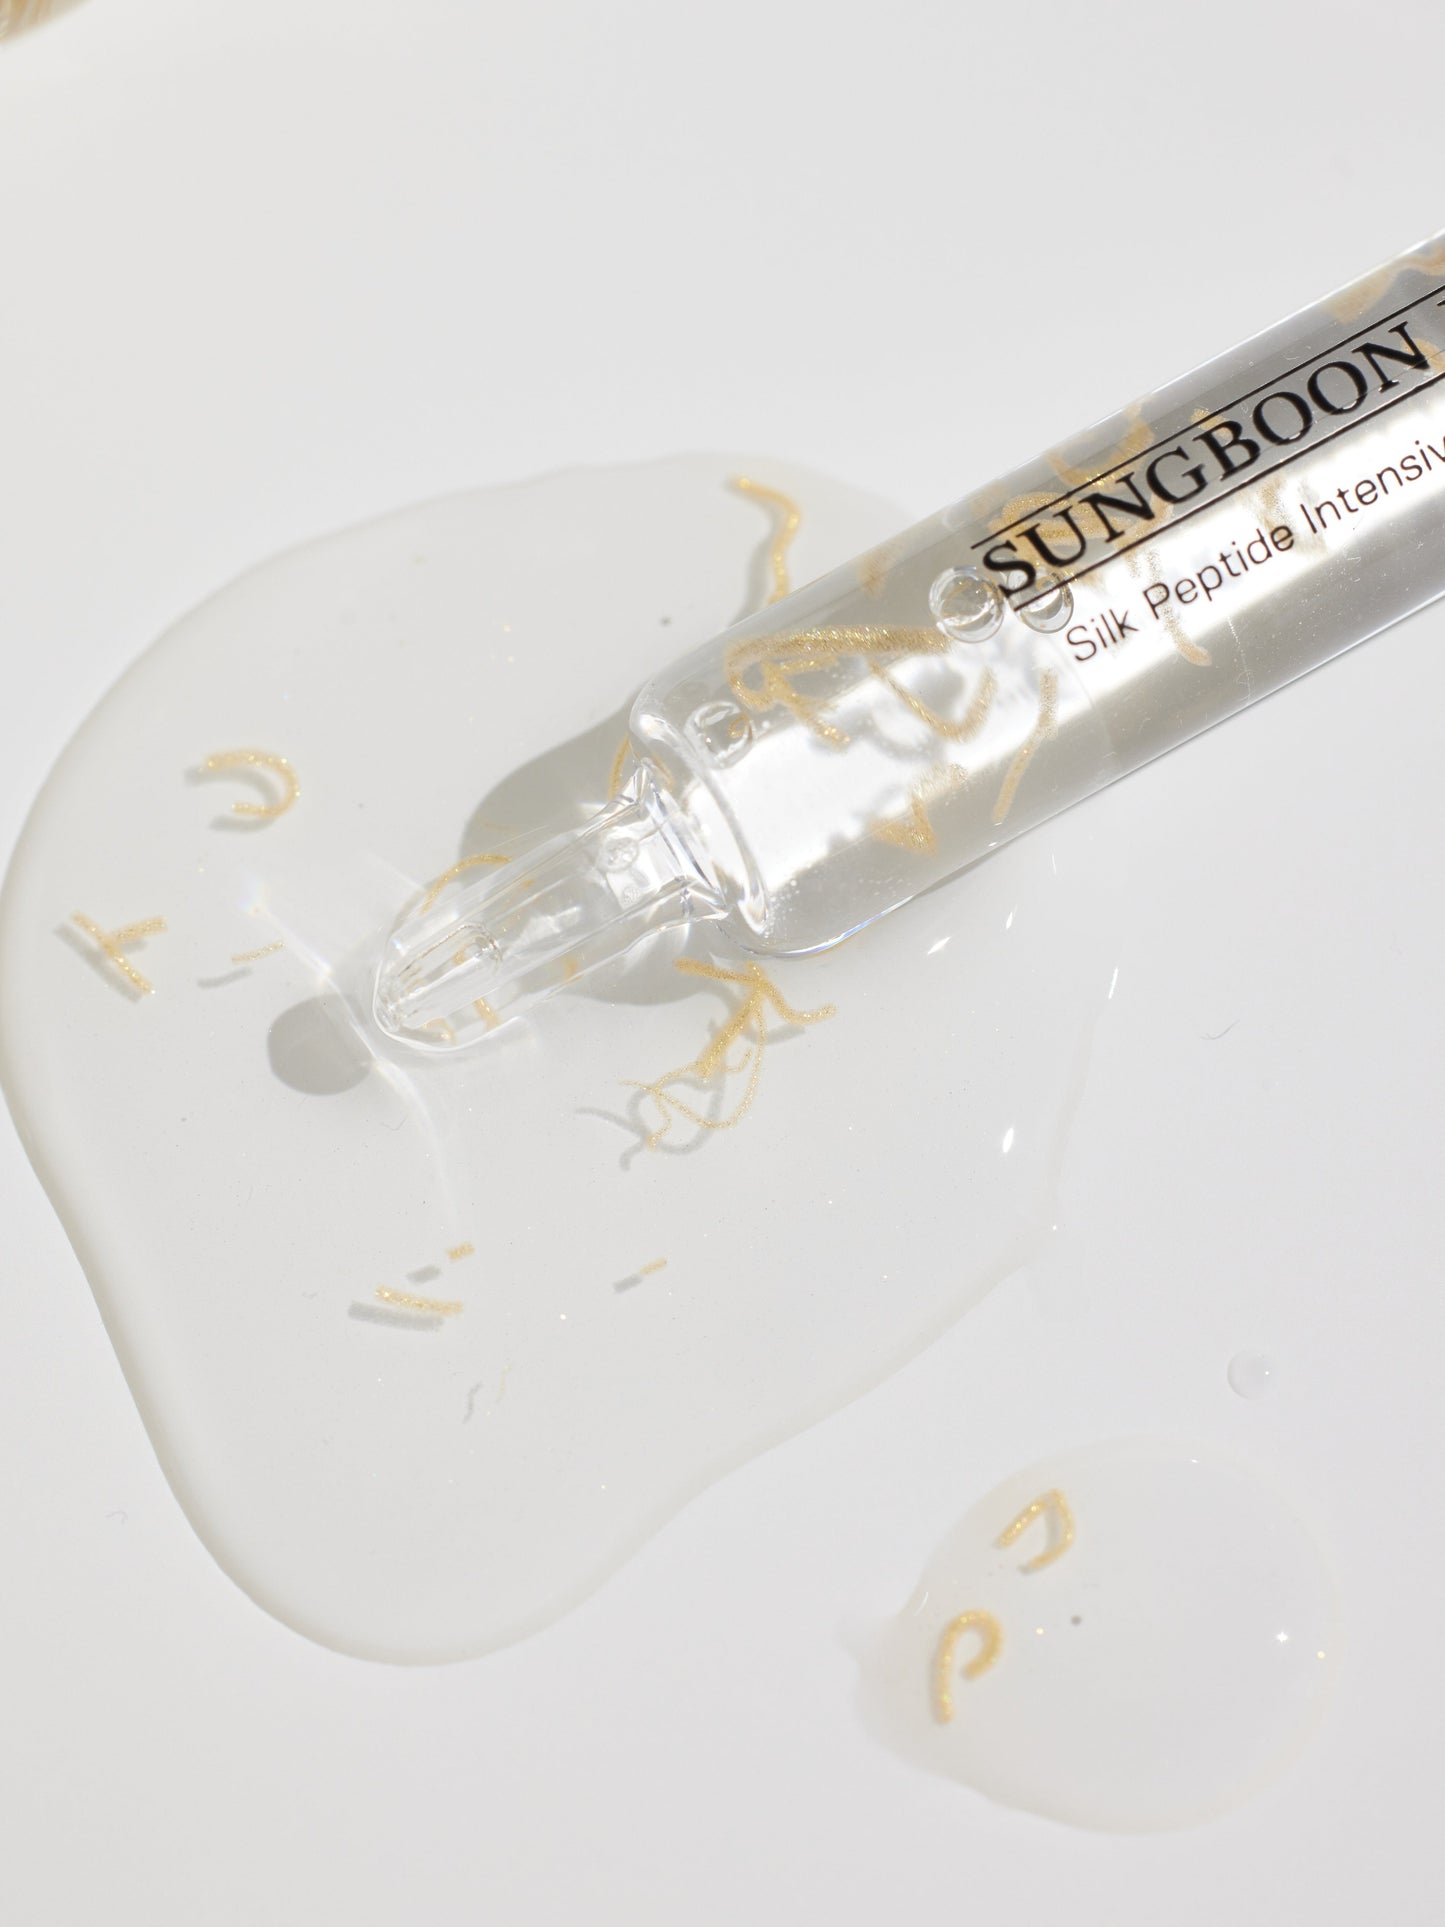 Sungboon Editor Silk Peptide Intensive Lifting Ampoule